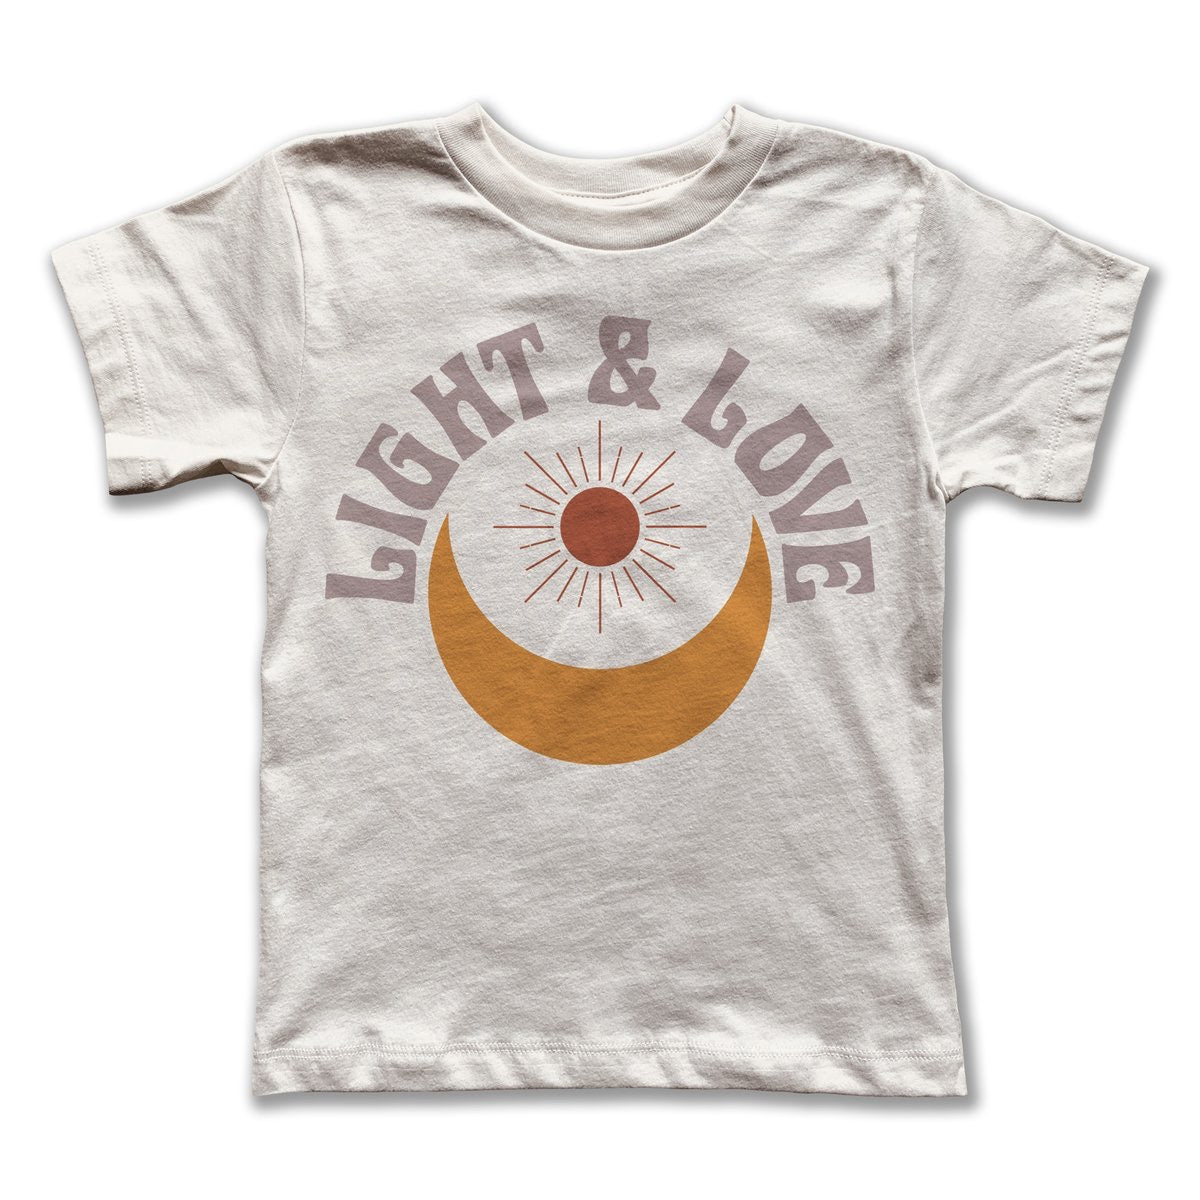 Rivet Apparel Co. - Graphic Tee - Light and Love